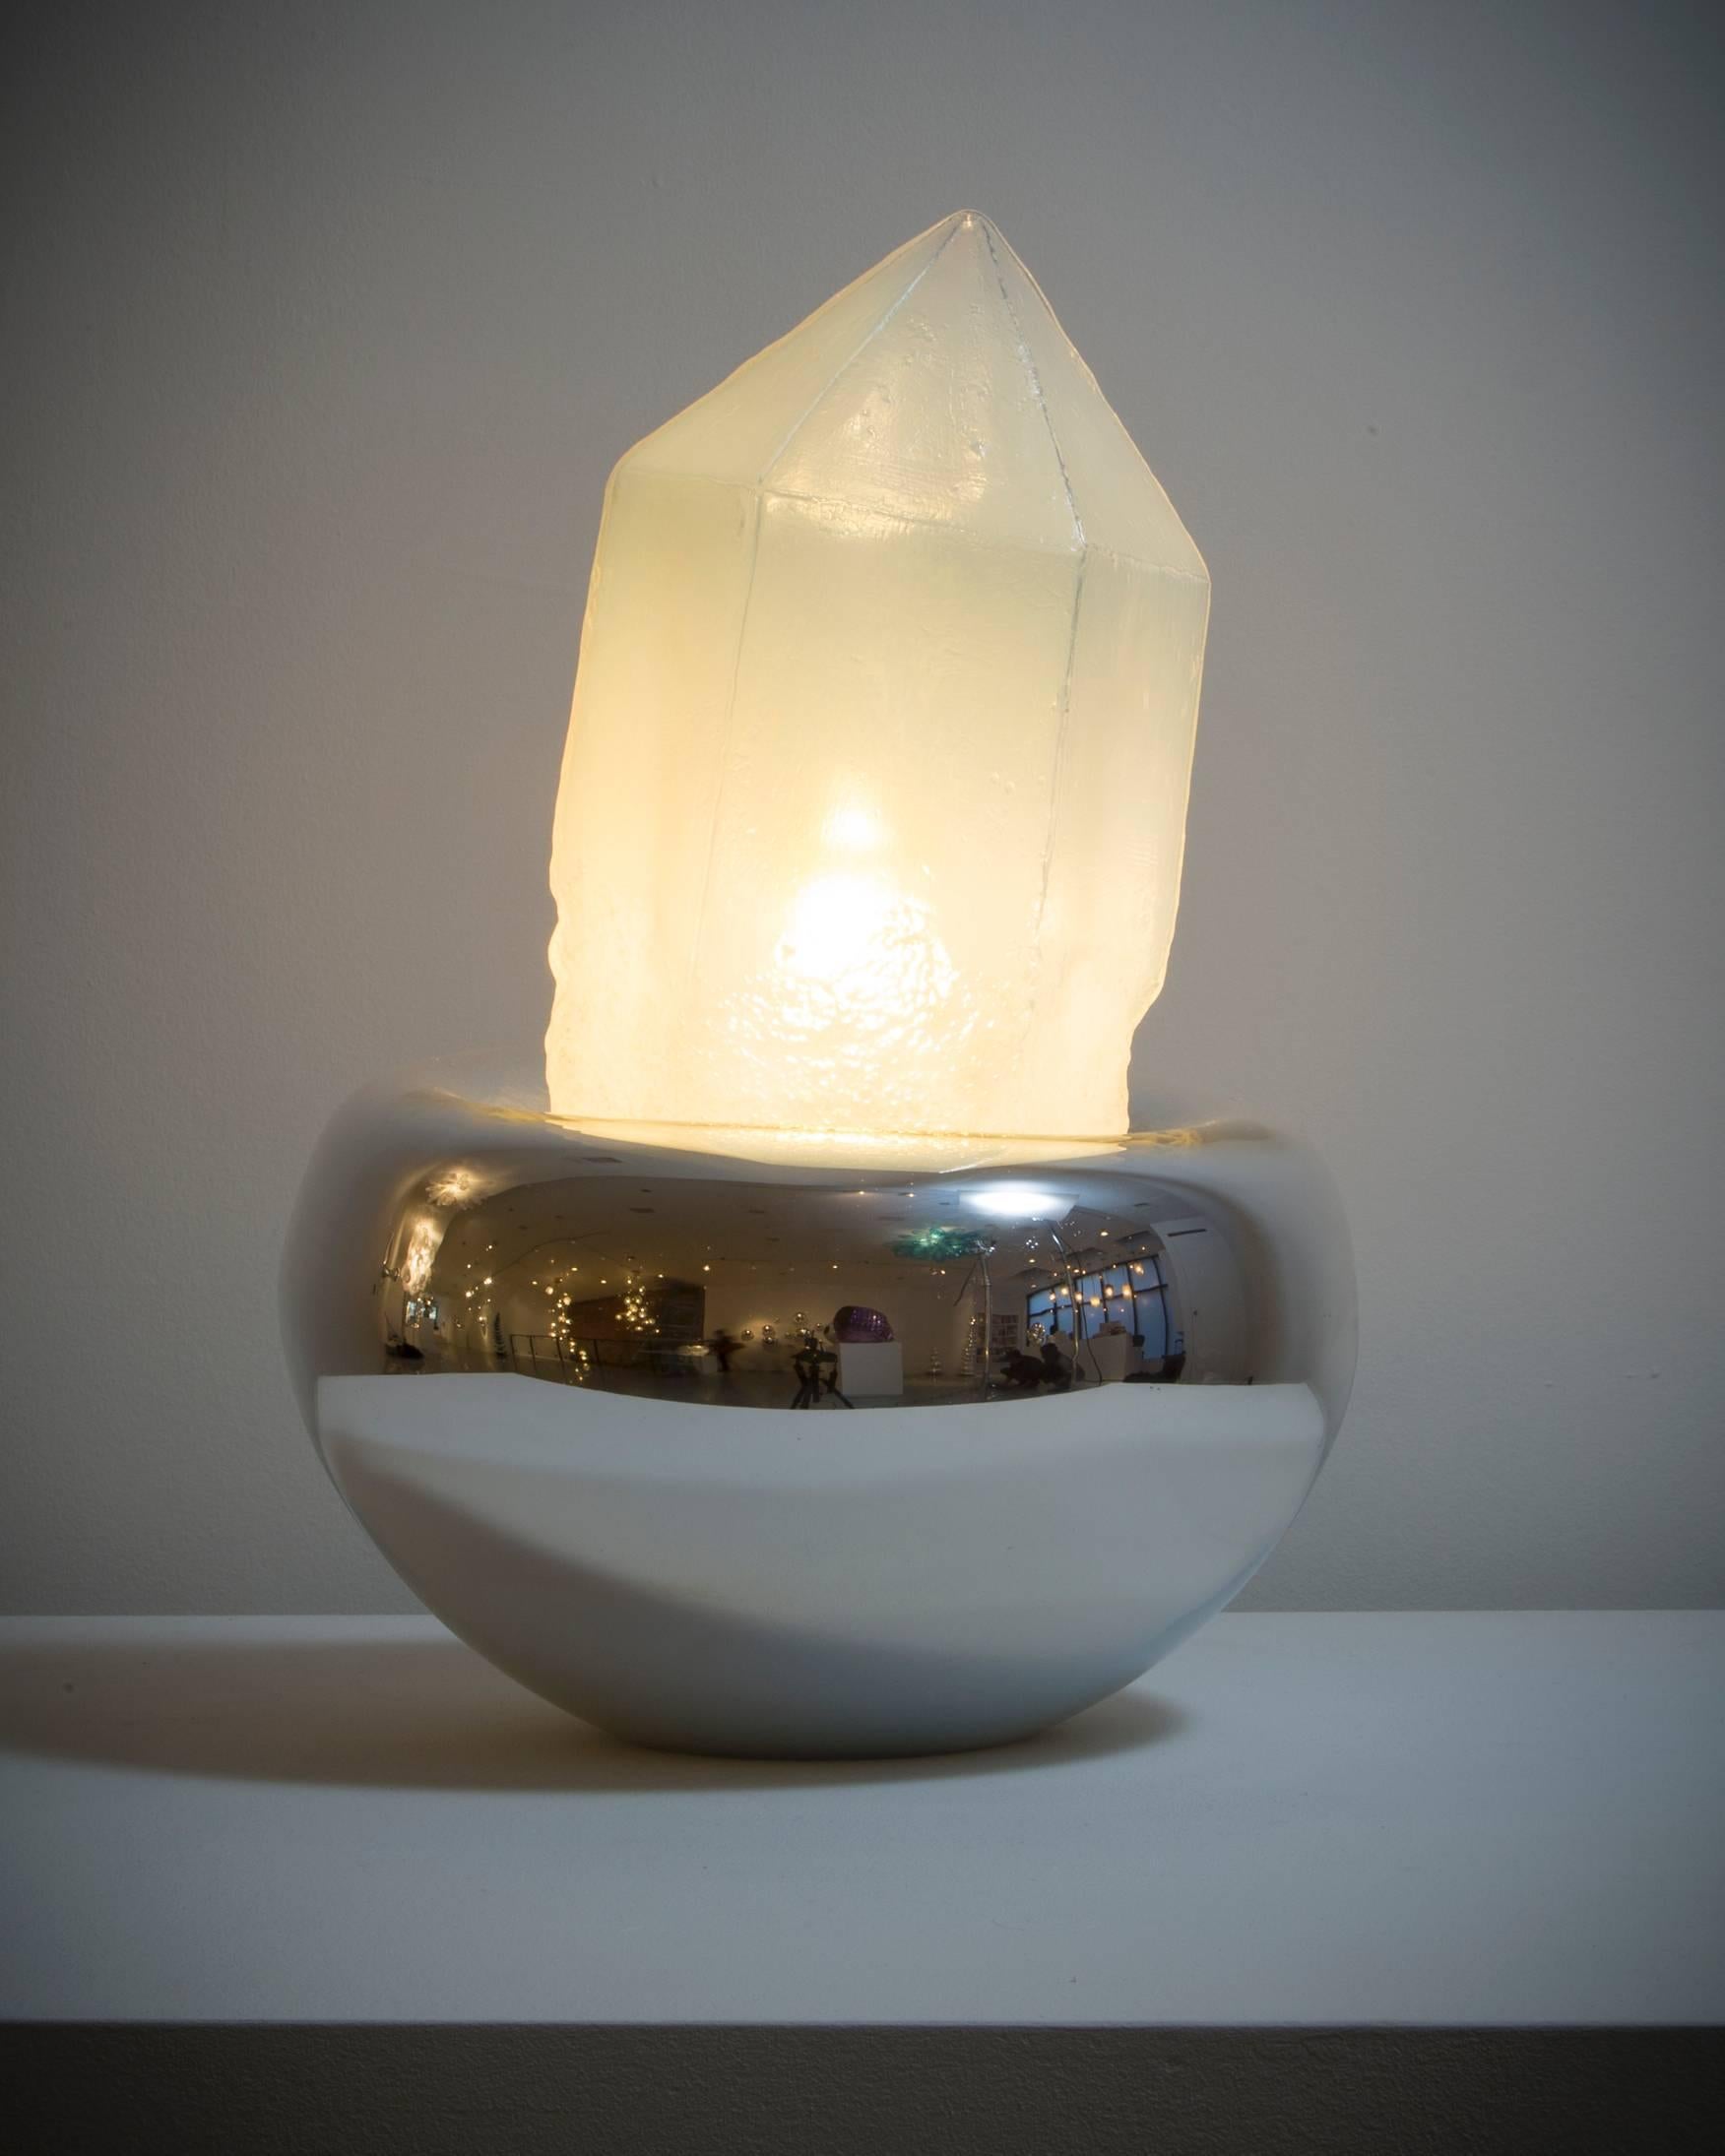 Unique illuminated sculpture in clear handblown glass and mirrorized glass base. Designed and made by Jeff Zimmerman, USA, 2015.